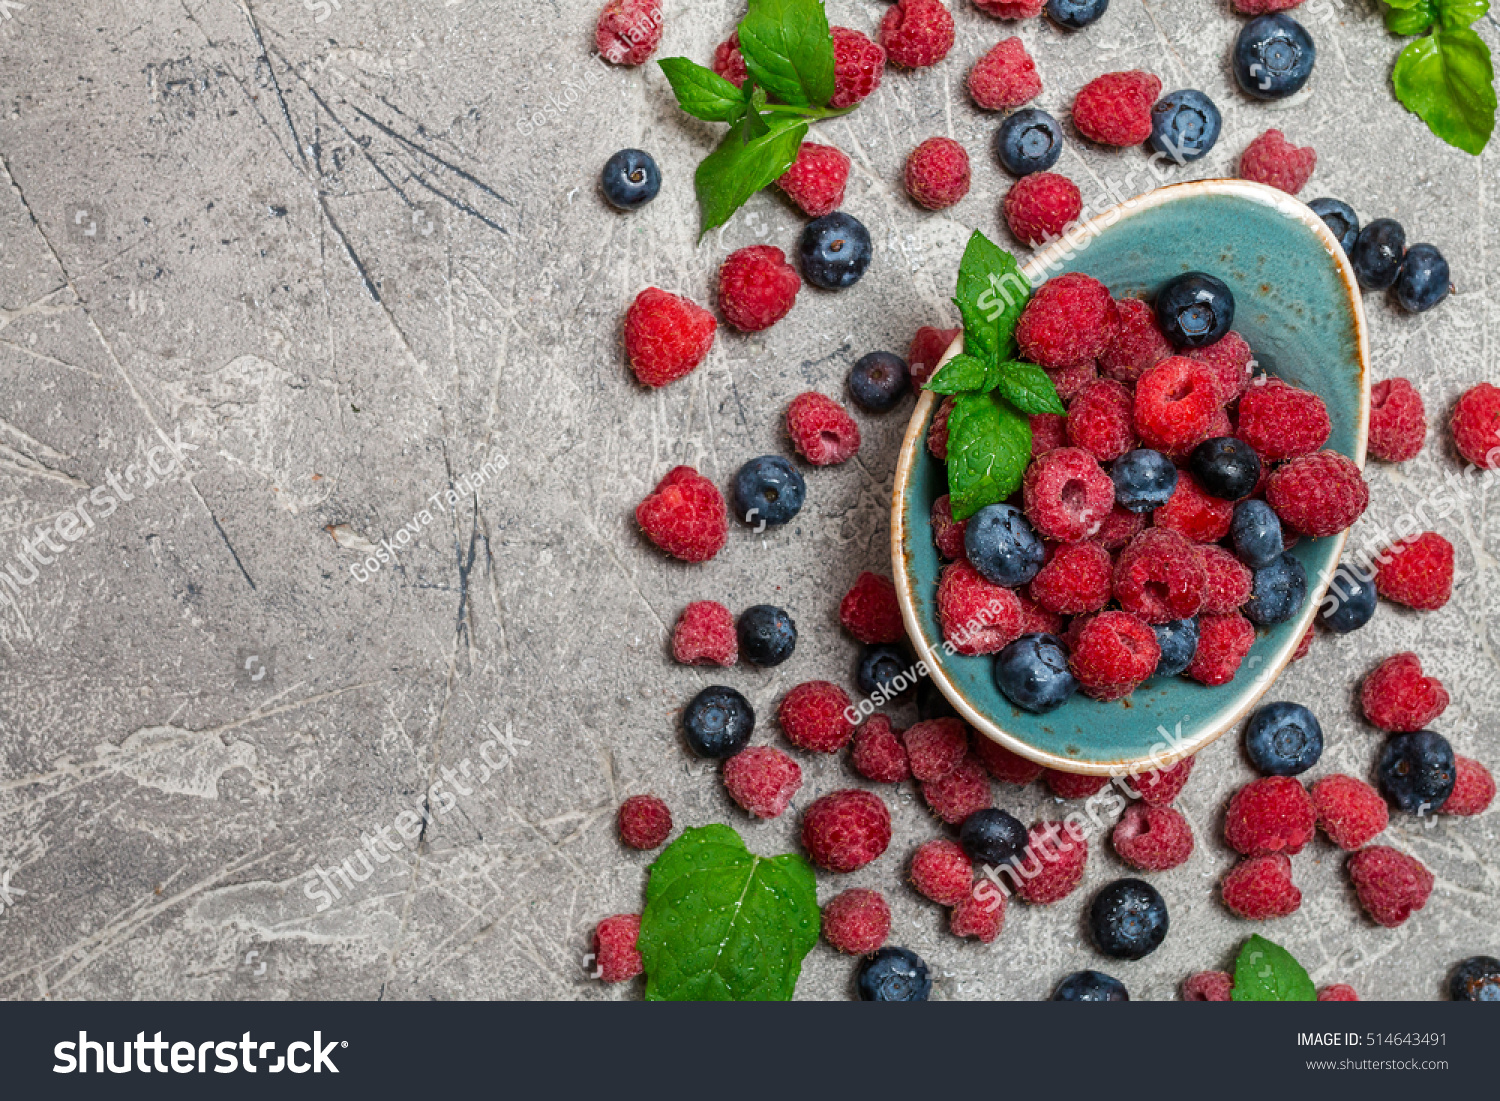 Fresh summer berries in vintage bowl over gray background,top view #514643491